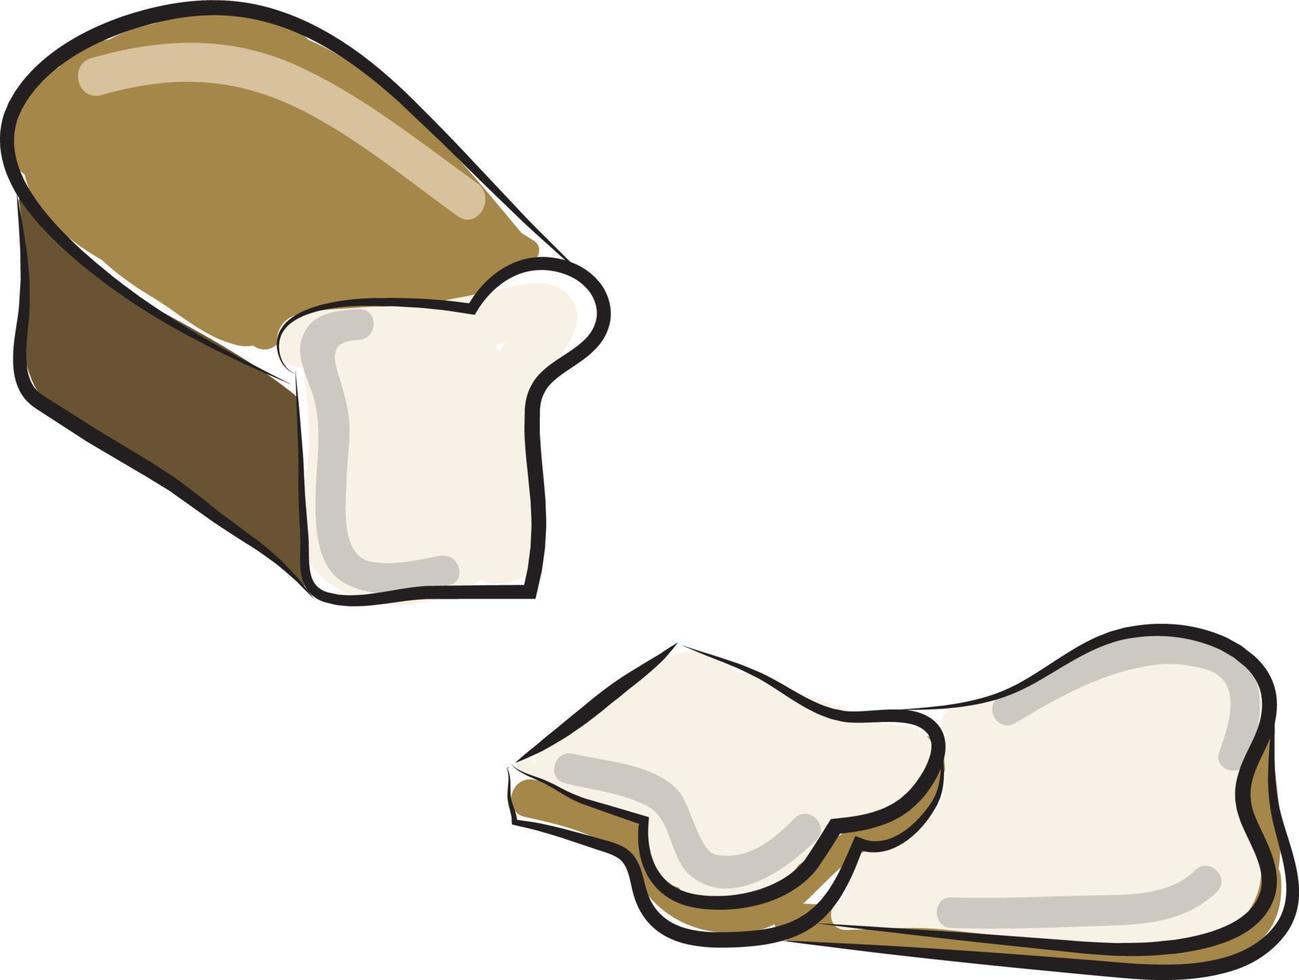 Cutting bread pieces, illustration, vector on white background.